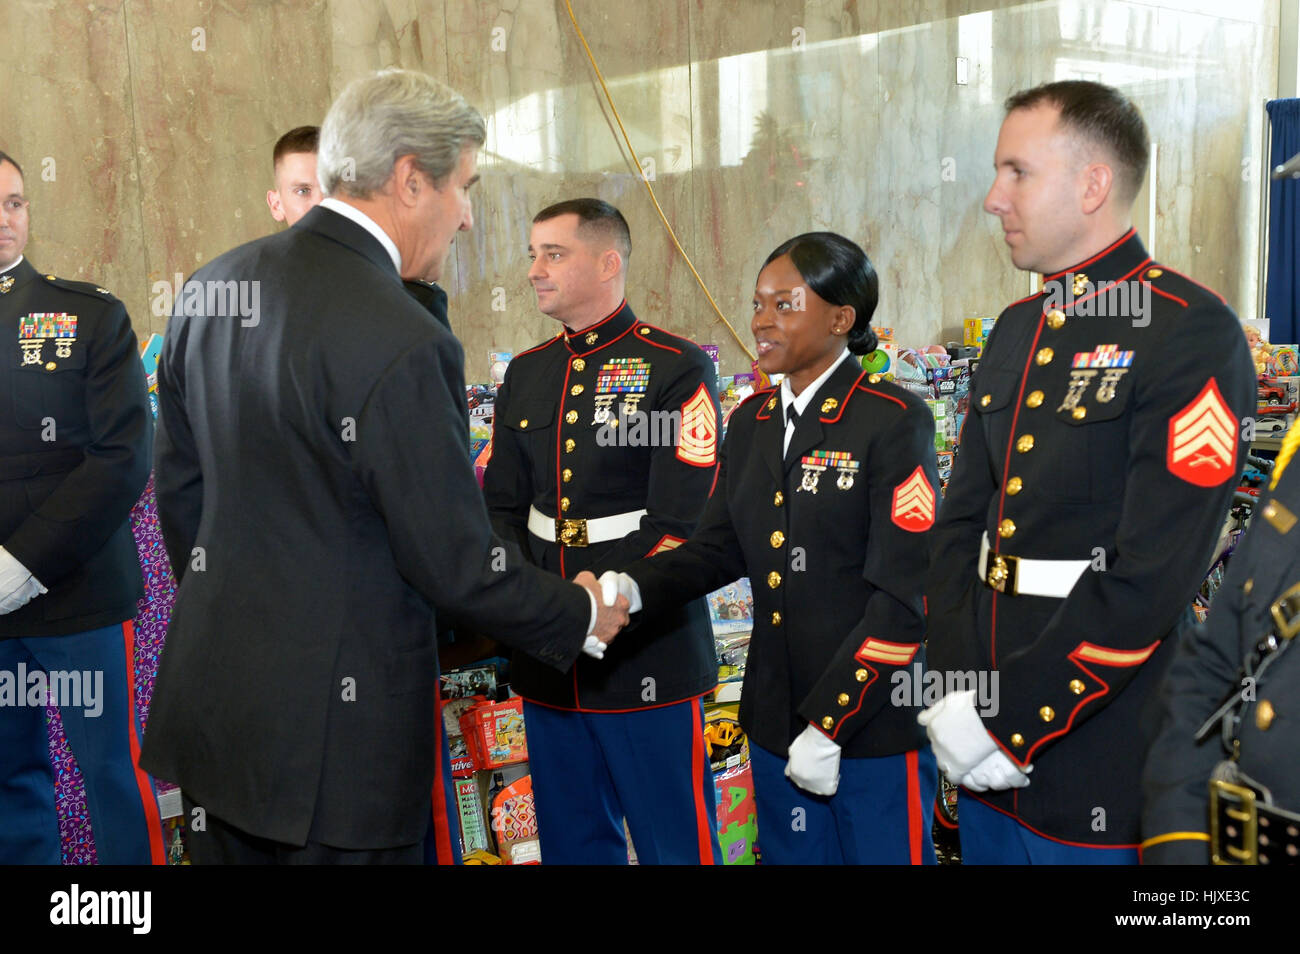 U.S. Secretary of State John Kerry greets U.S. Marines at the Toys for Tots ceremonial presentation to the Marine Corps Reserve, at the U.S. Department of State in Washington, D.C., on December 14, 2016. Stock Photo